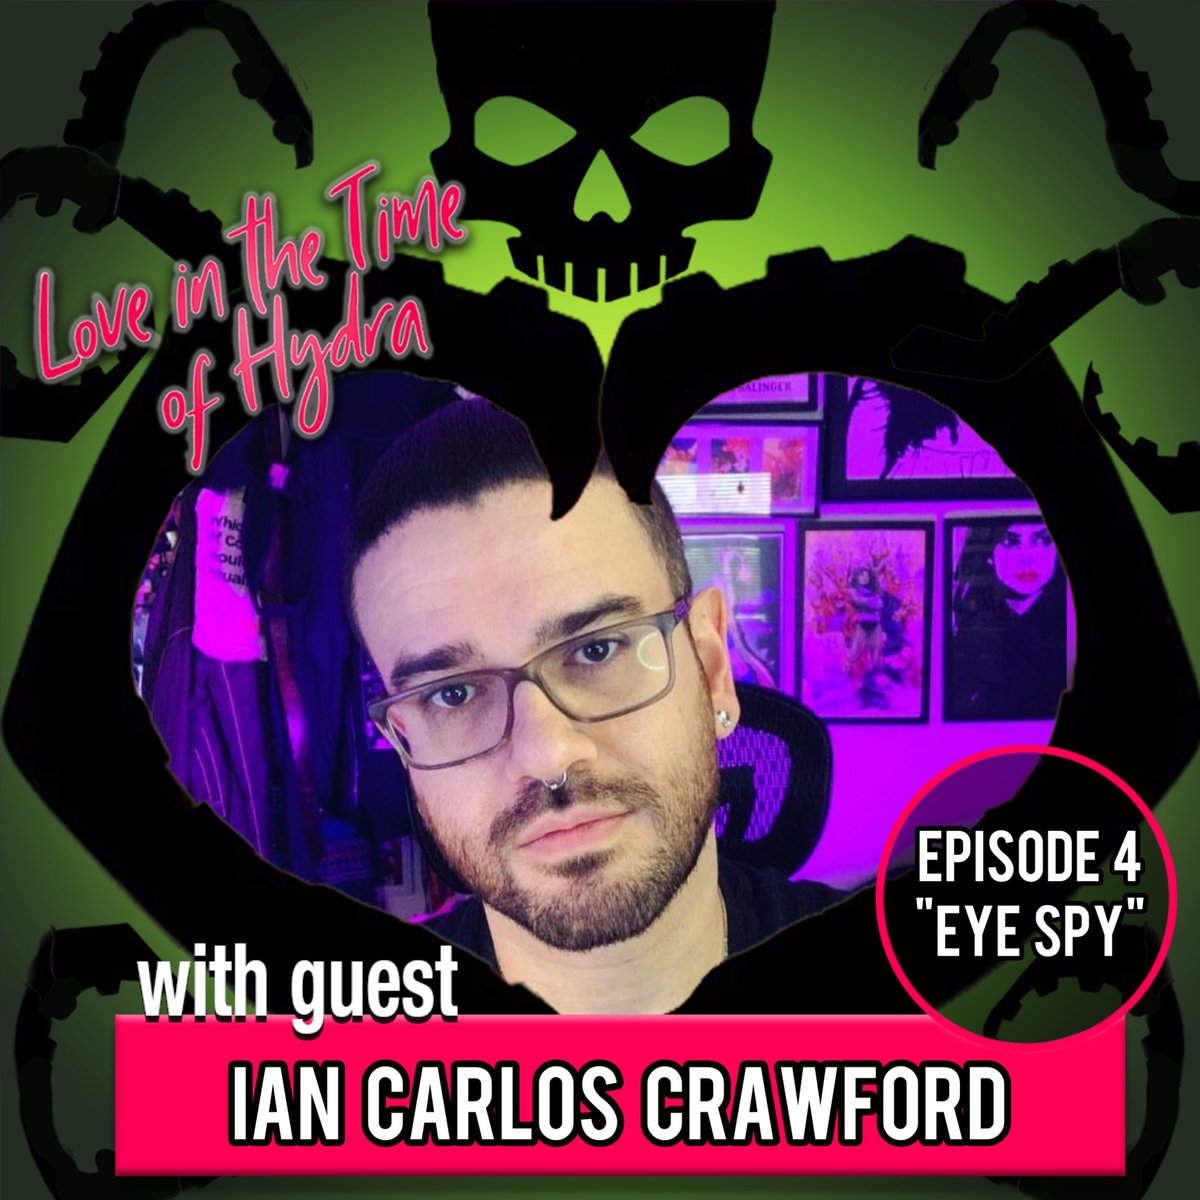 New guest alert! Announcing @ianxcarlos on the same day new Buffy content drops? Coincidence? Actually, yes, but it's still exciting! Listen to Ian on #LITTOH this Sun, but first, check out all the #SlayersxAudible coverage coming to @slayerfestx98!